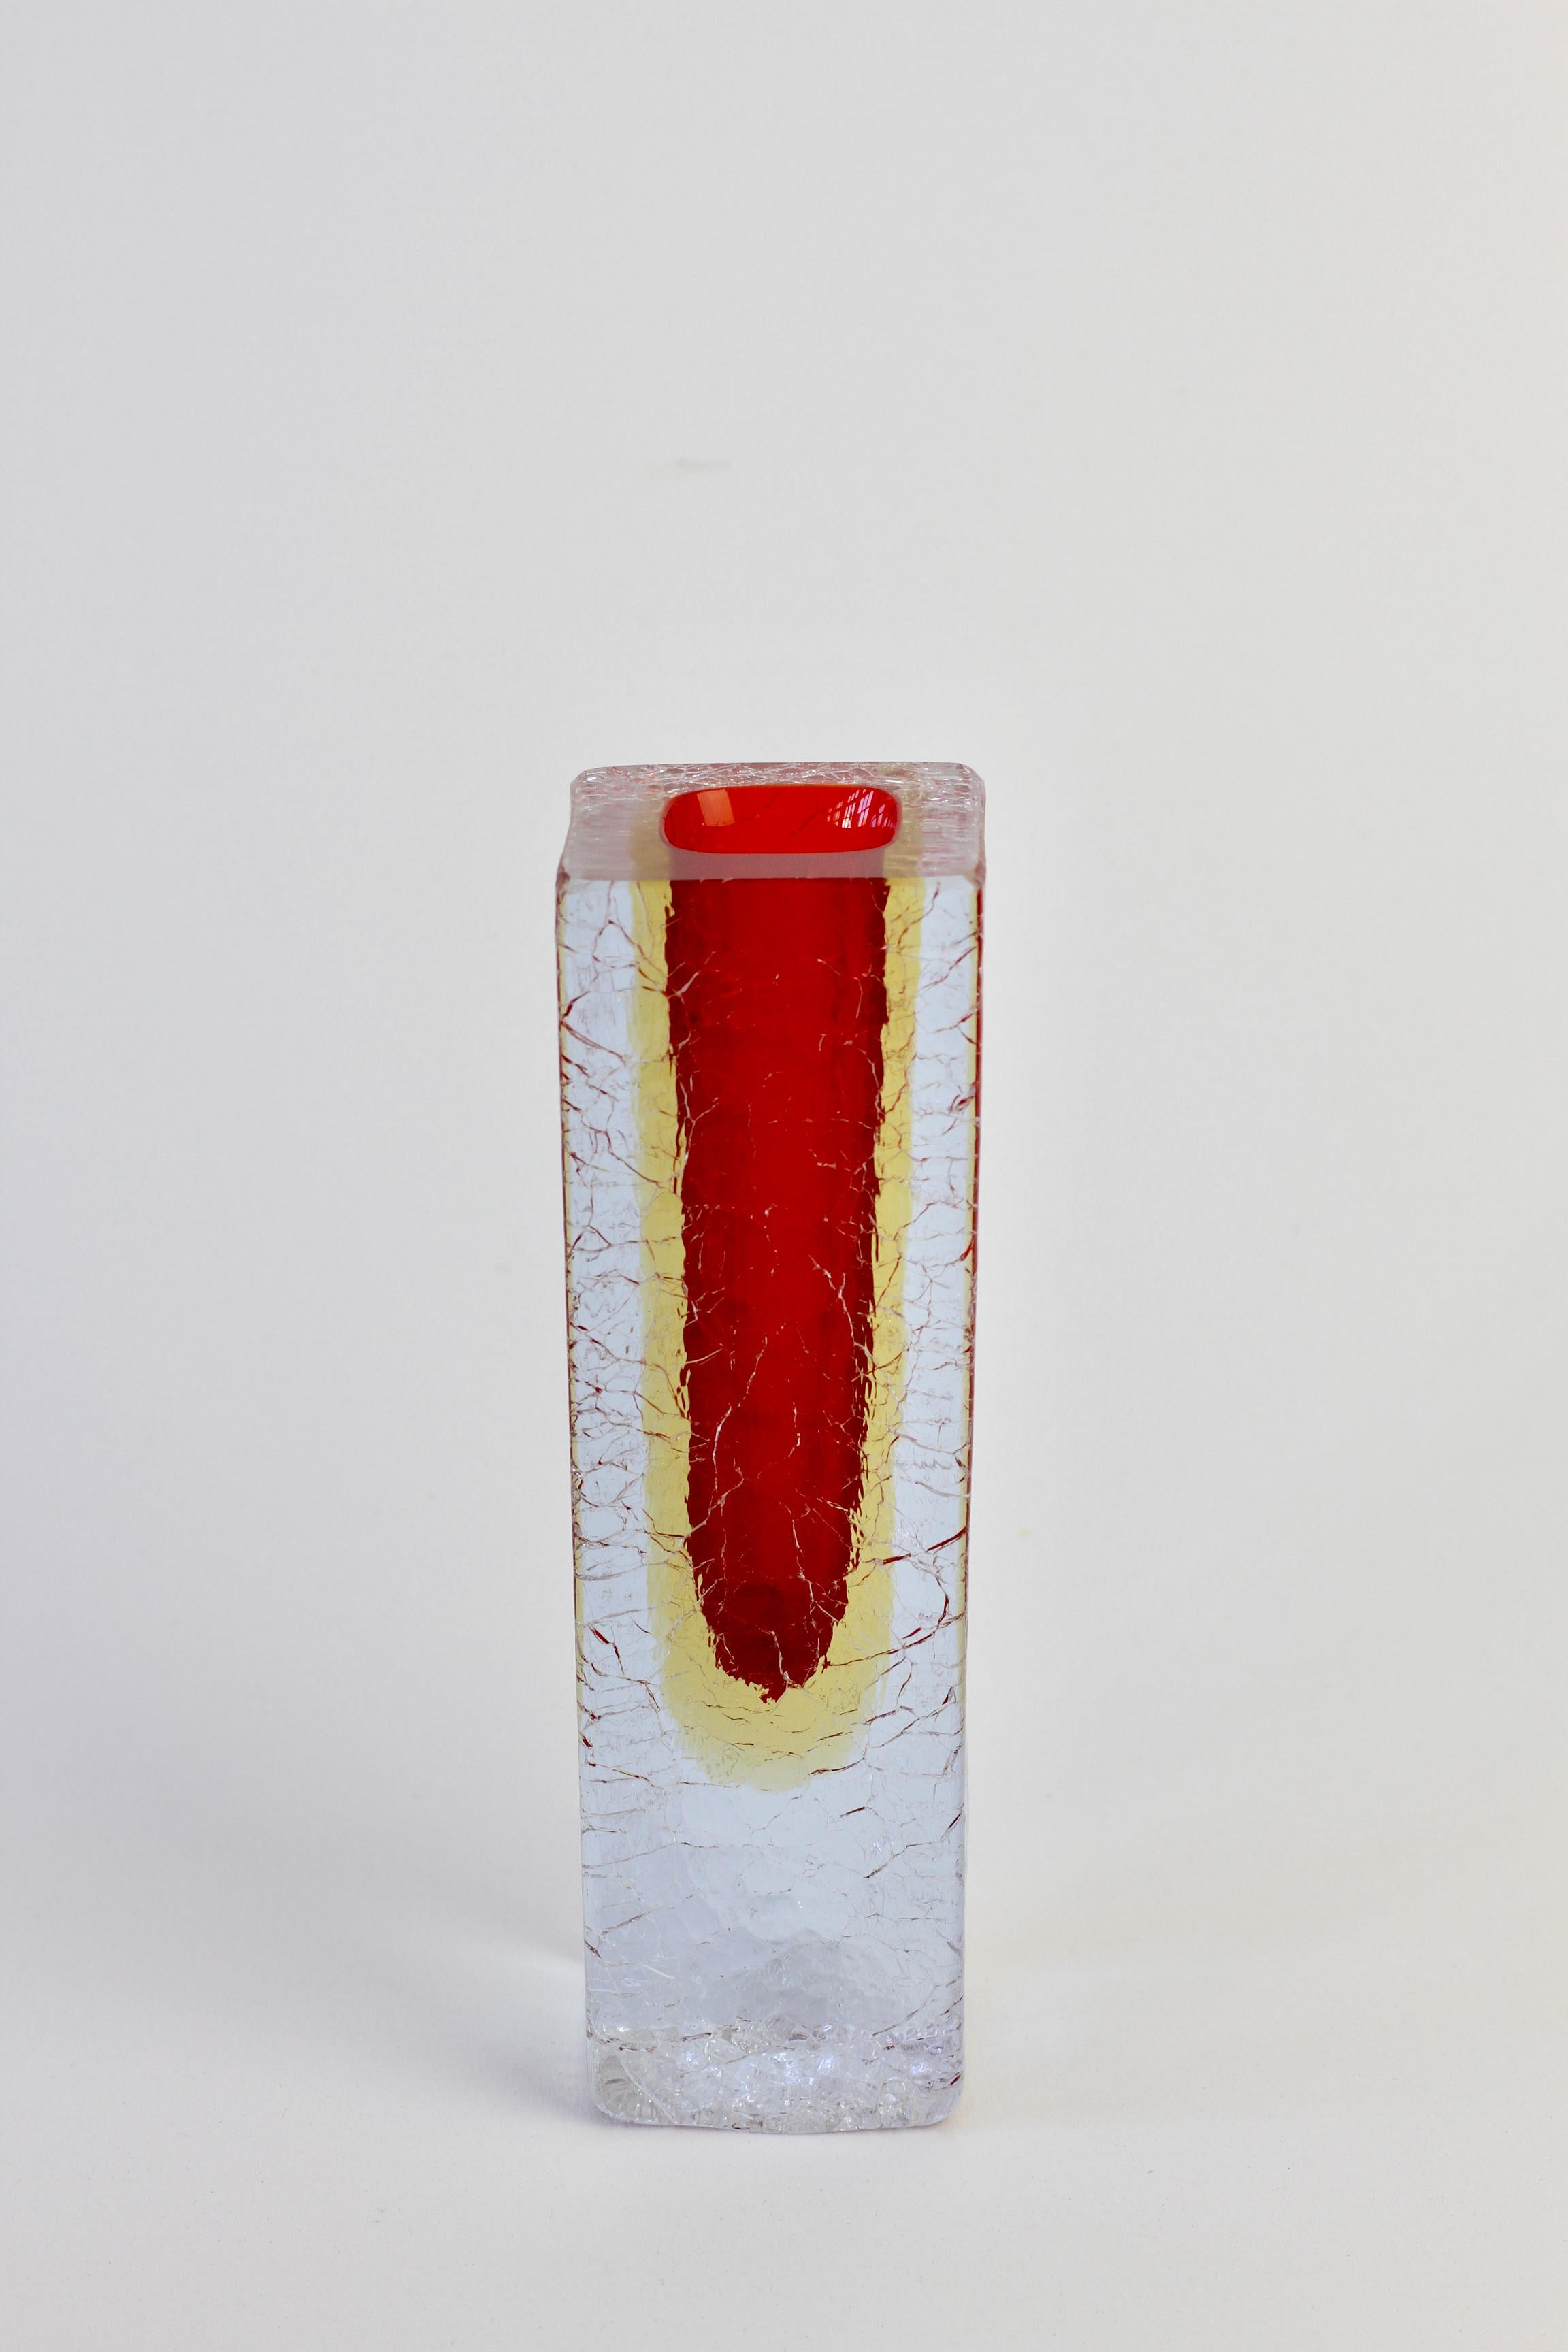 Faceted Red & Yellow Italian Murano 'Sommerso' Crackle Glass Vase, circa 1960s For Sale 3